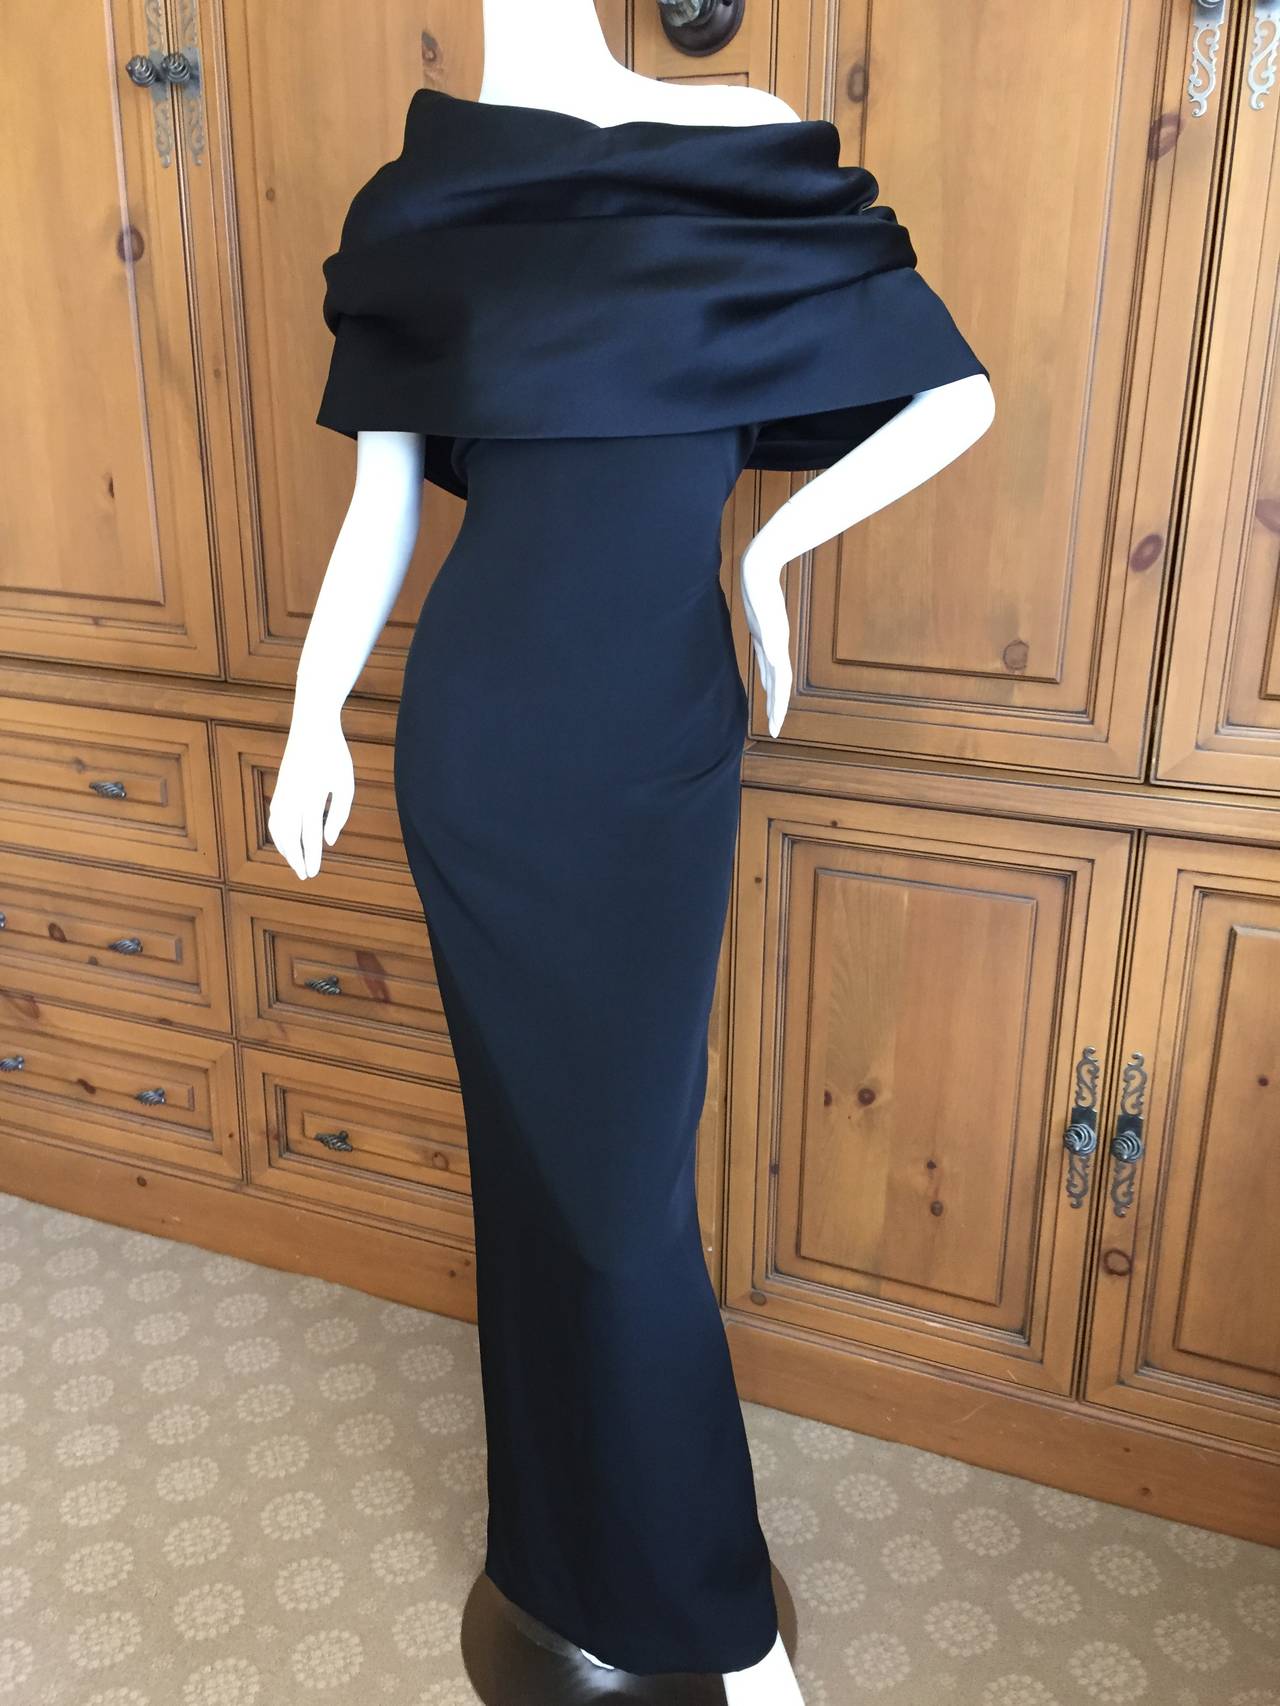 Bill Blass Lovely 70's Black Sleeveless Dress with Attached Capelet / Stole 2